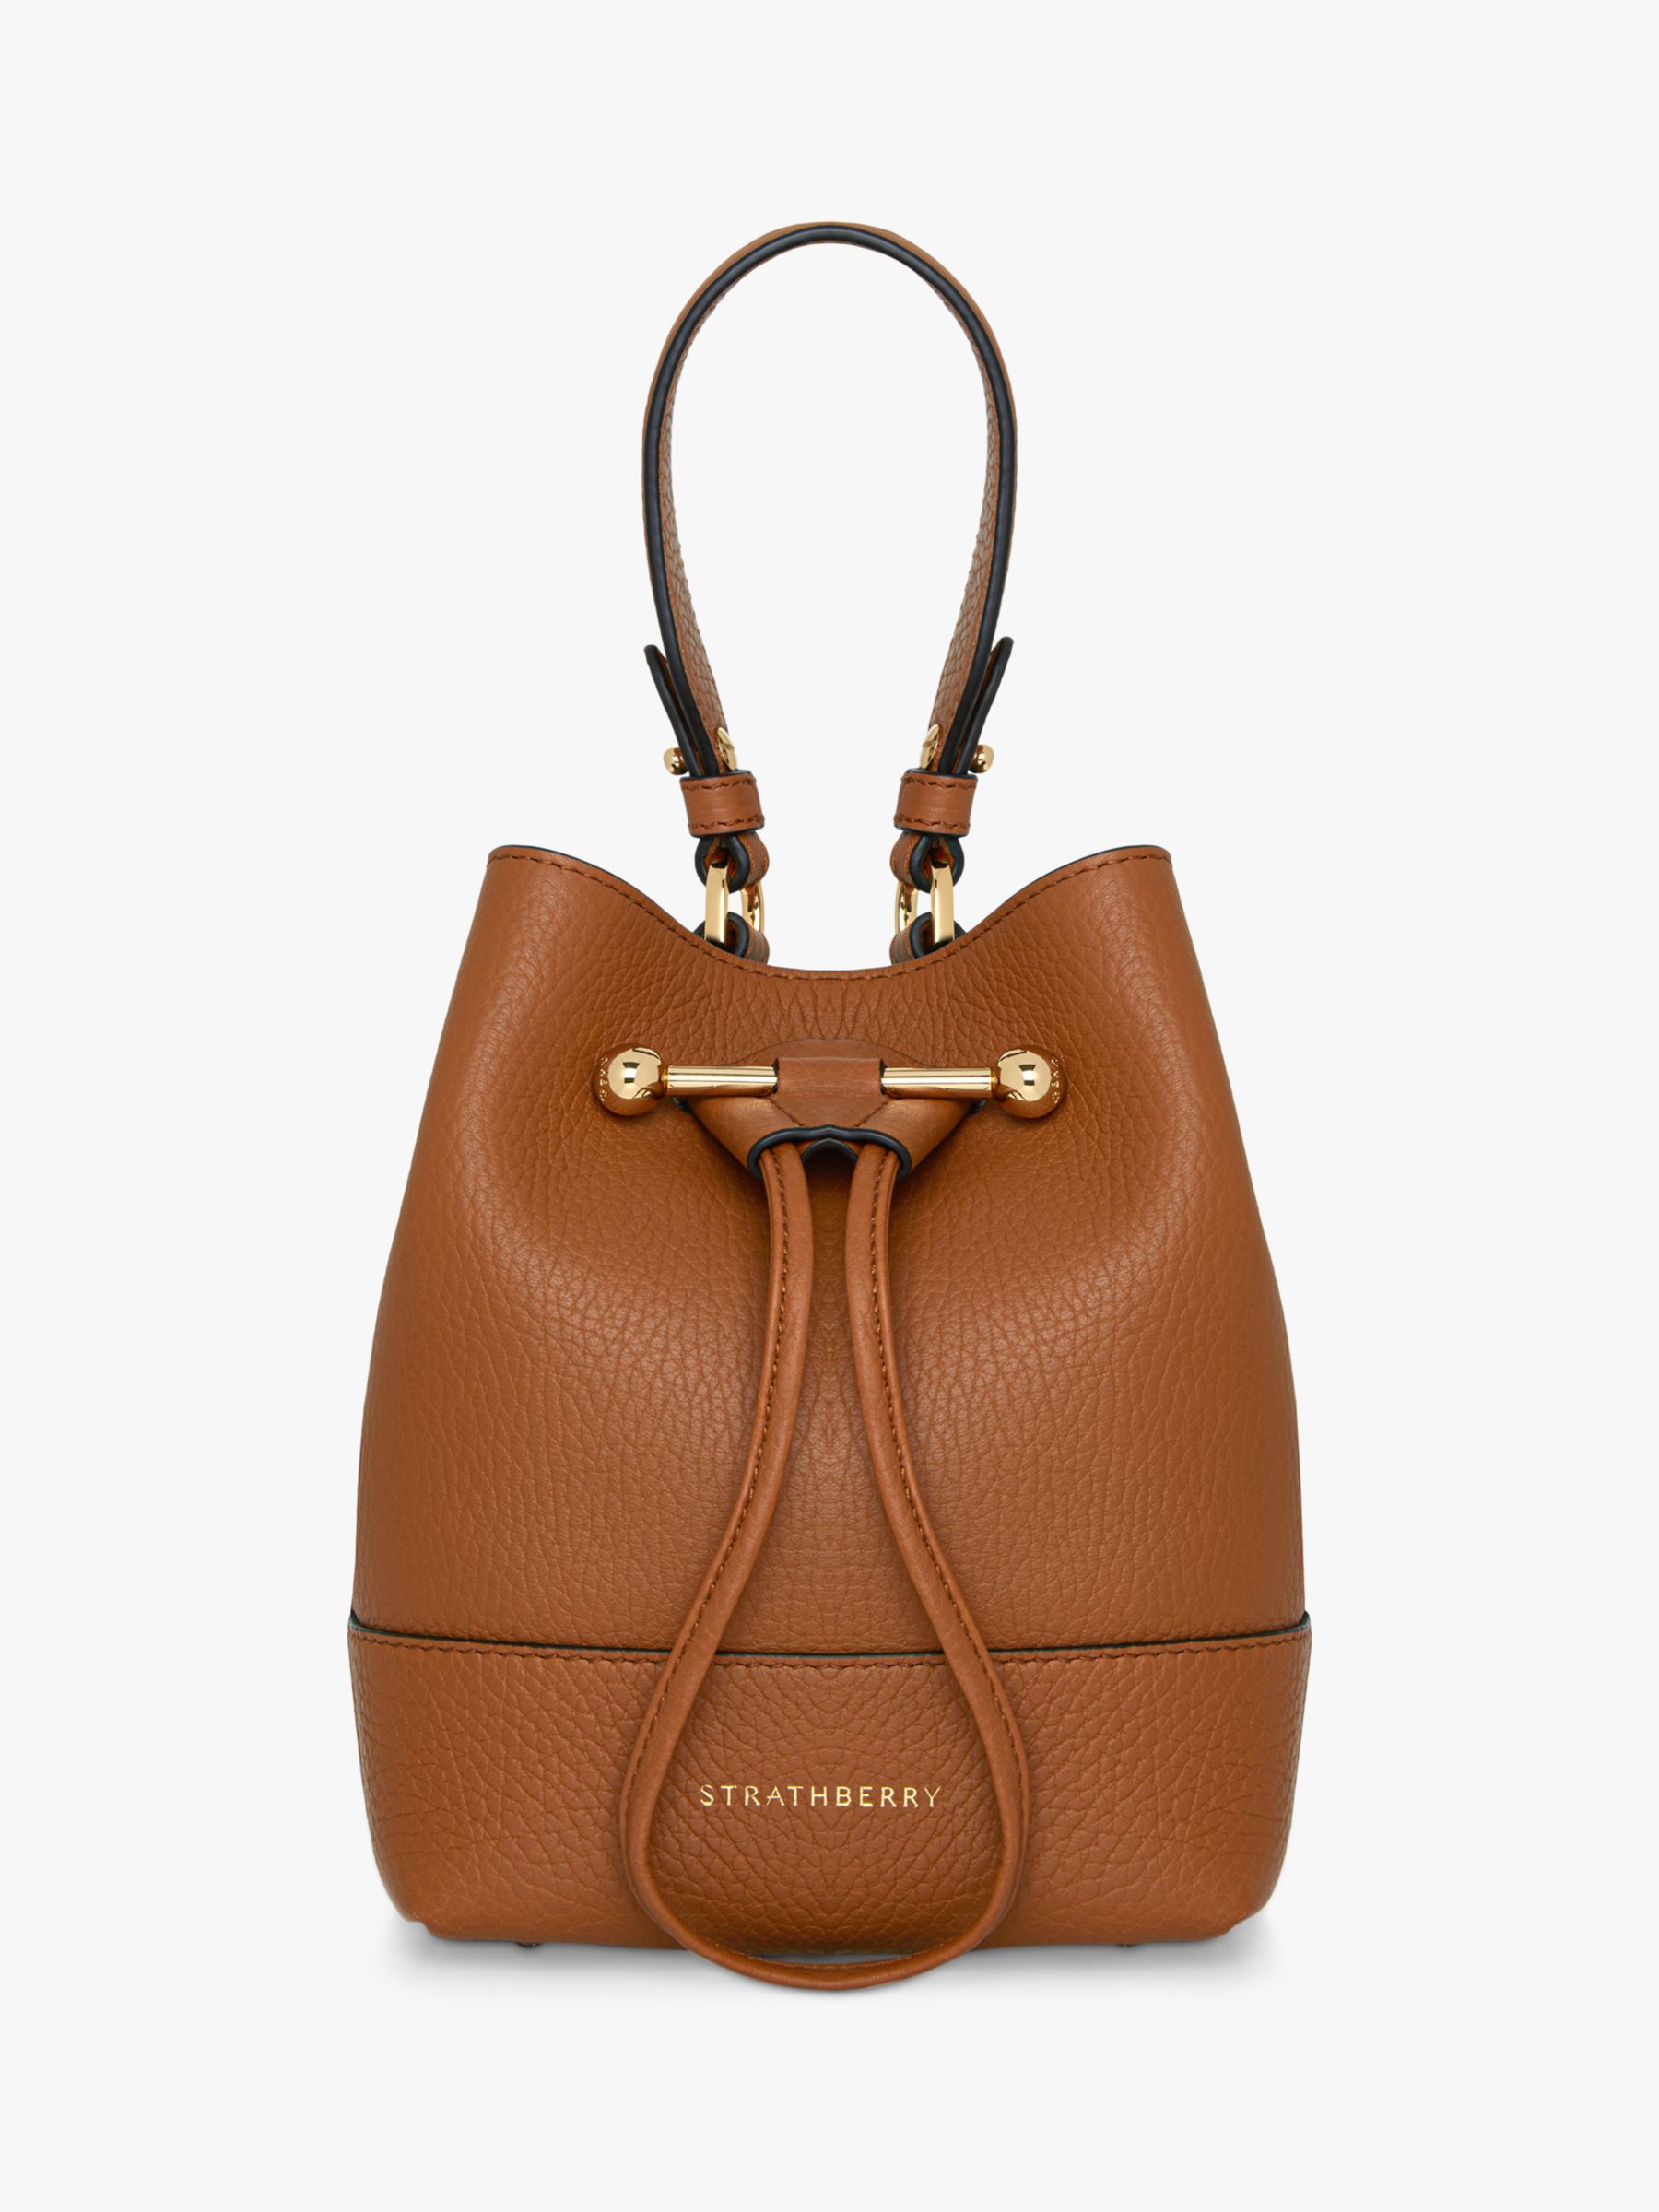 Strathberry Lana Osette Leather Bucket Bag, Tan at John Lewis & Partners